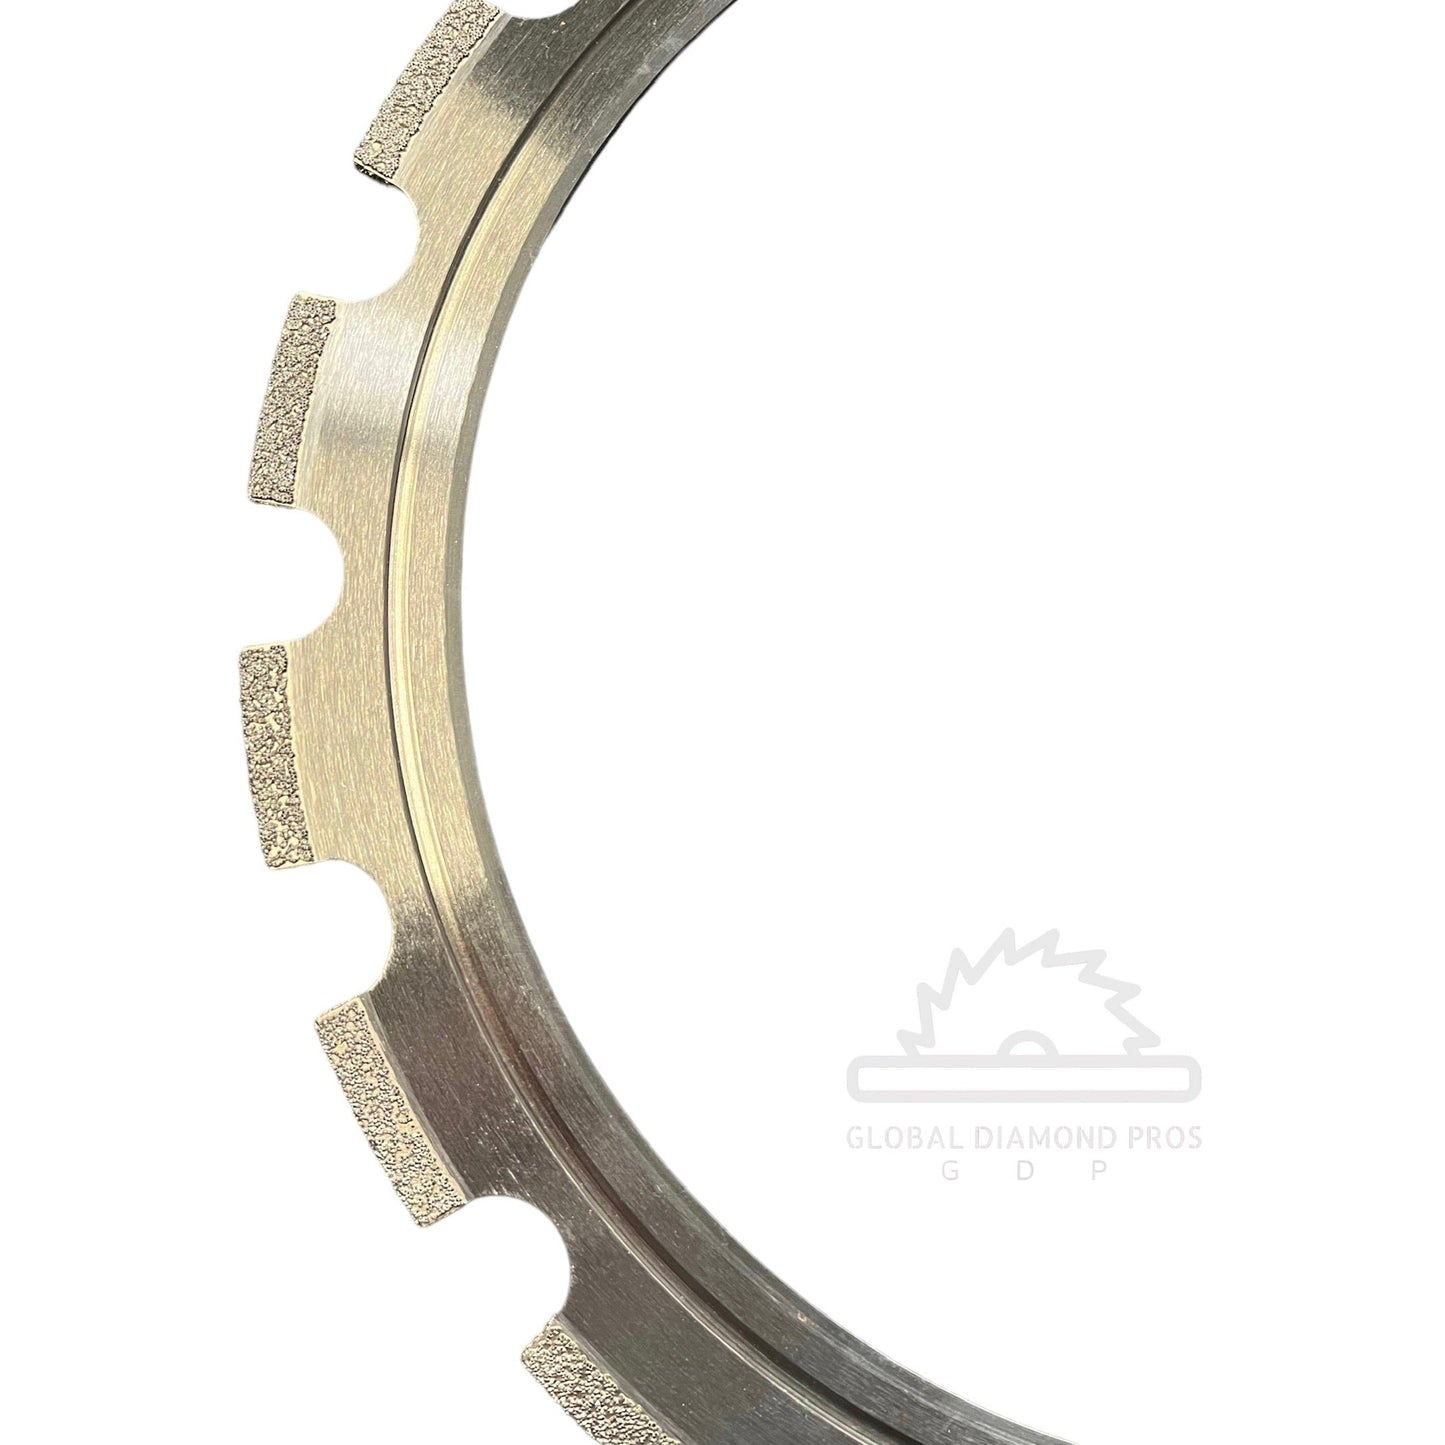 Ductile Iron Ring Saw Blades